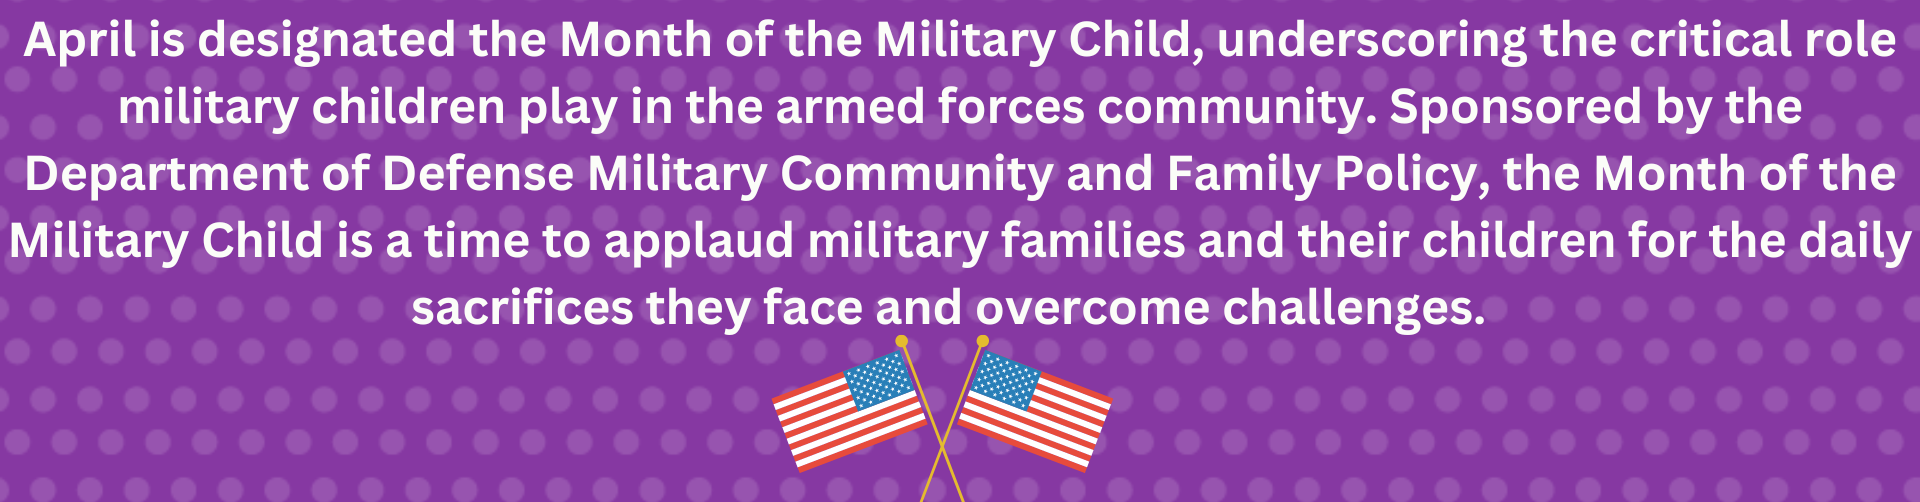 April Month of the Military Child